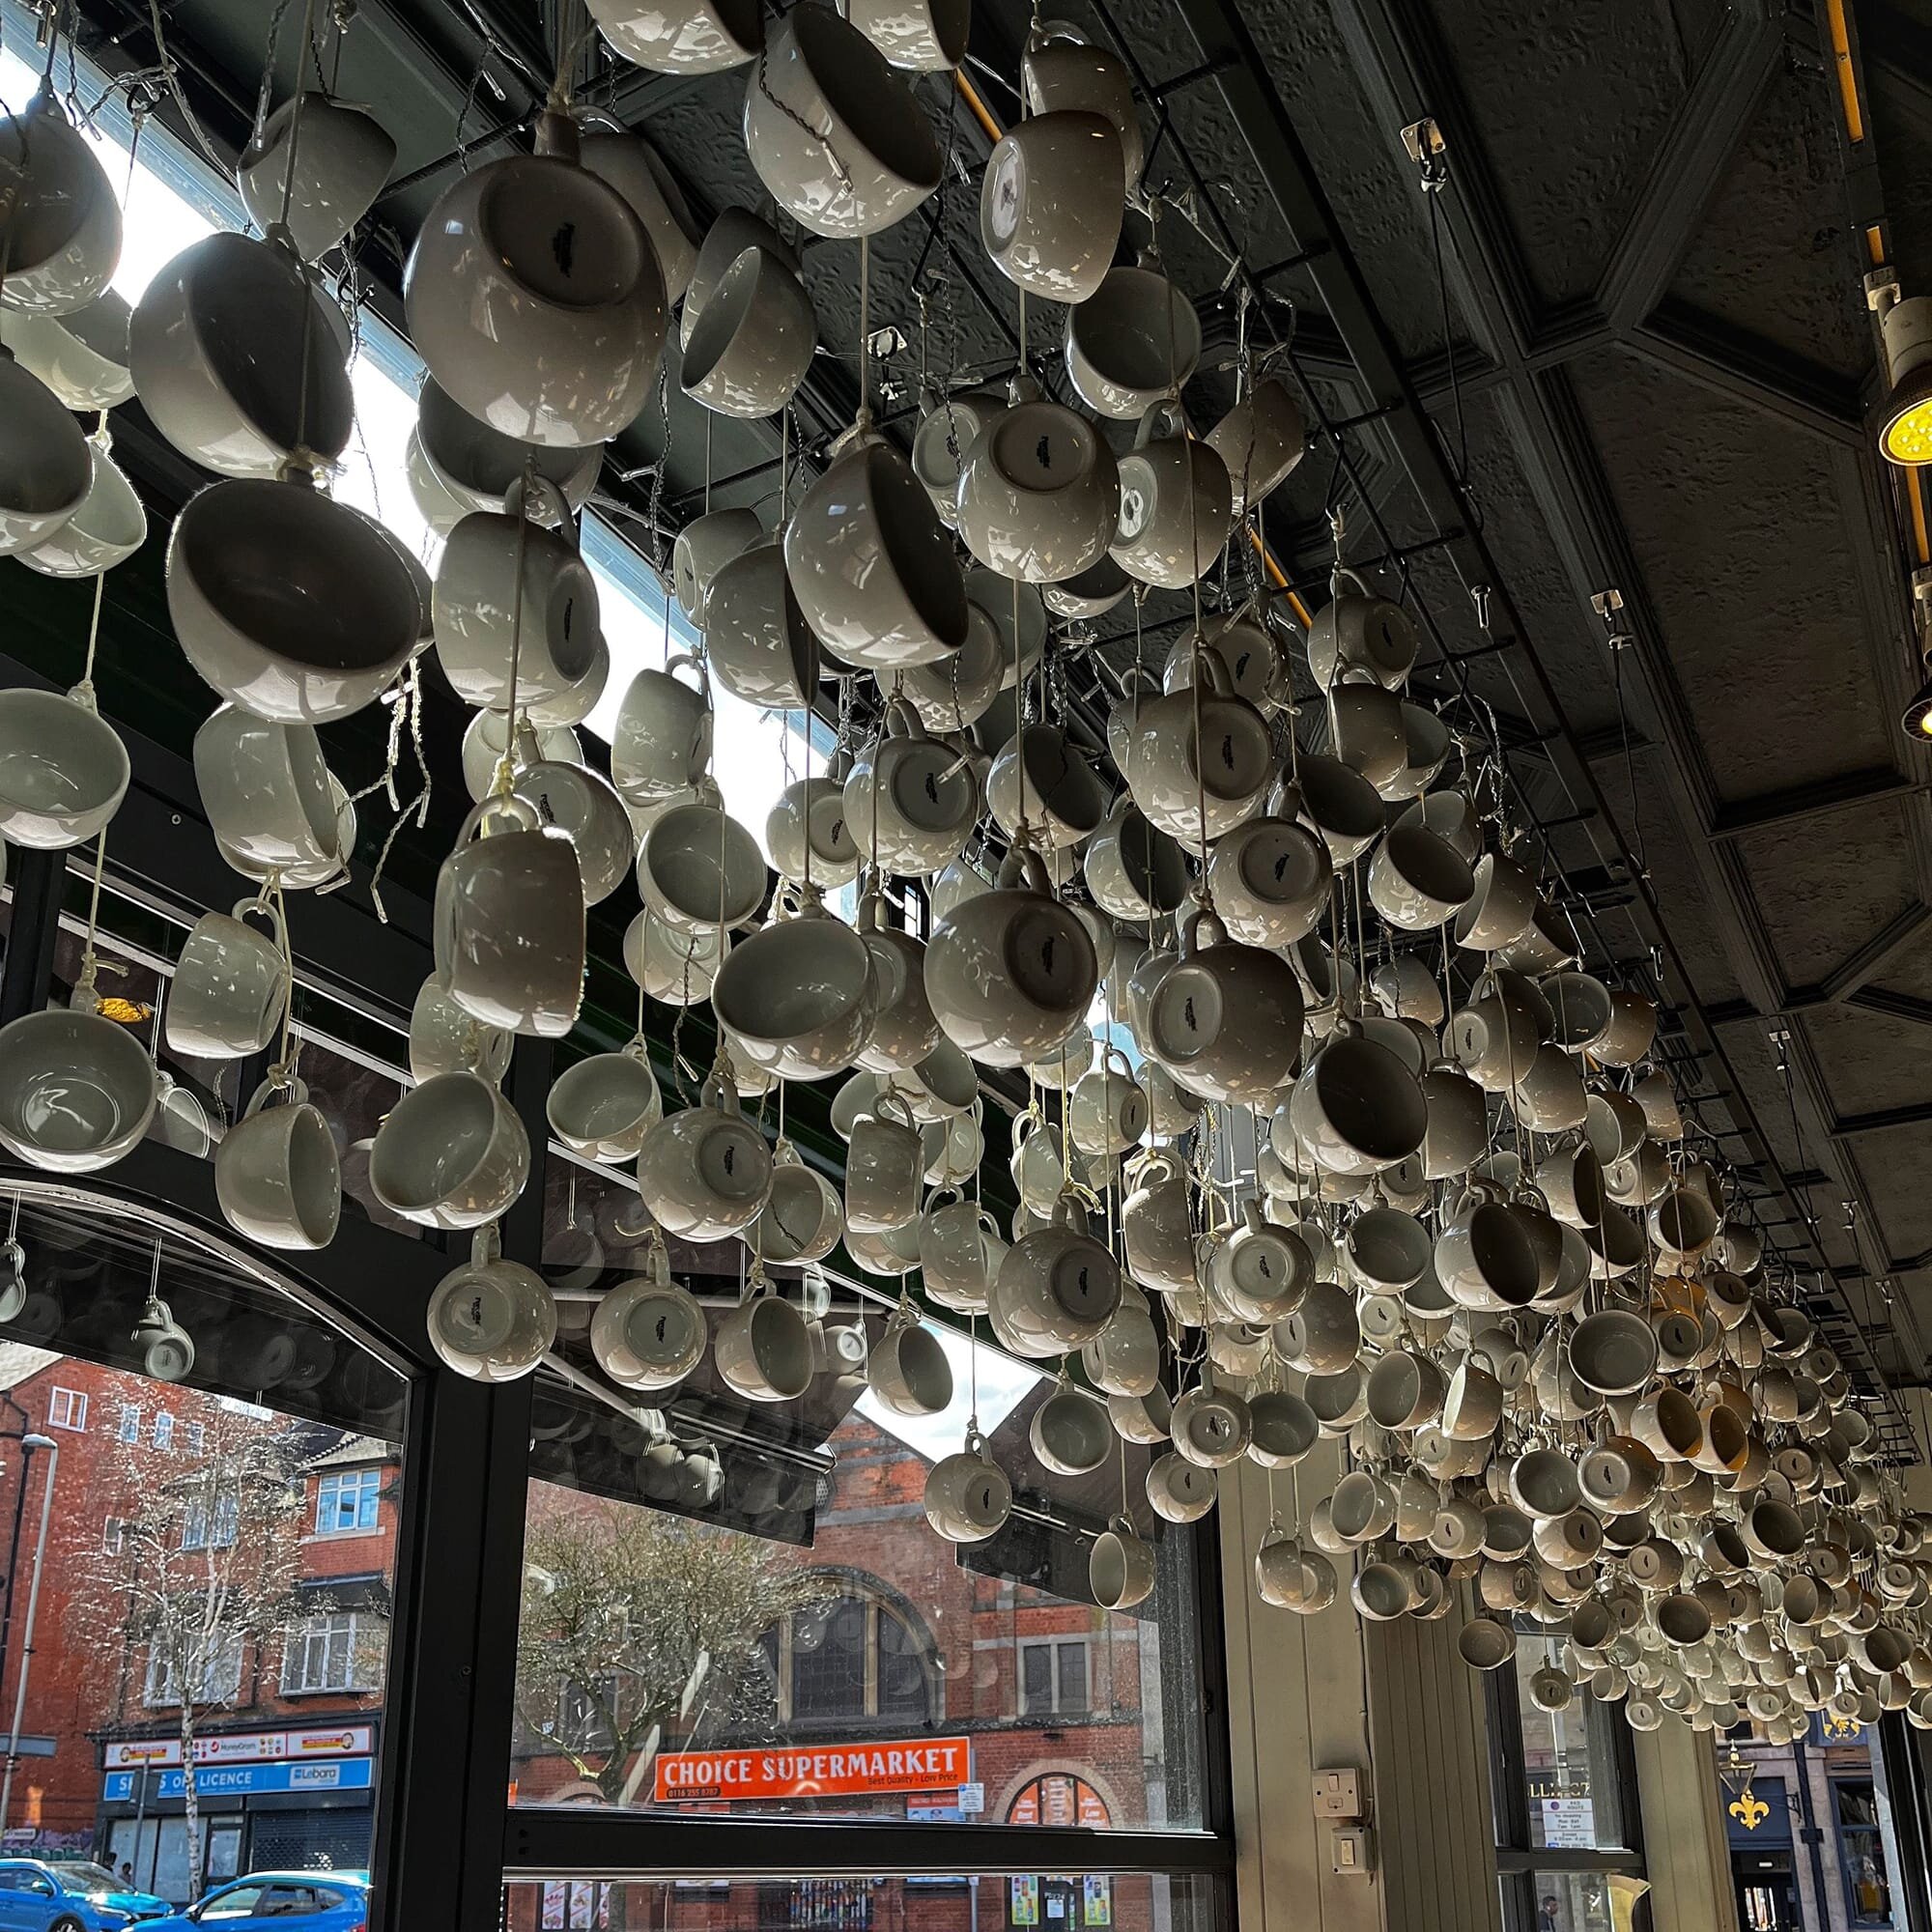 Hanging cups